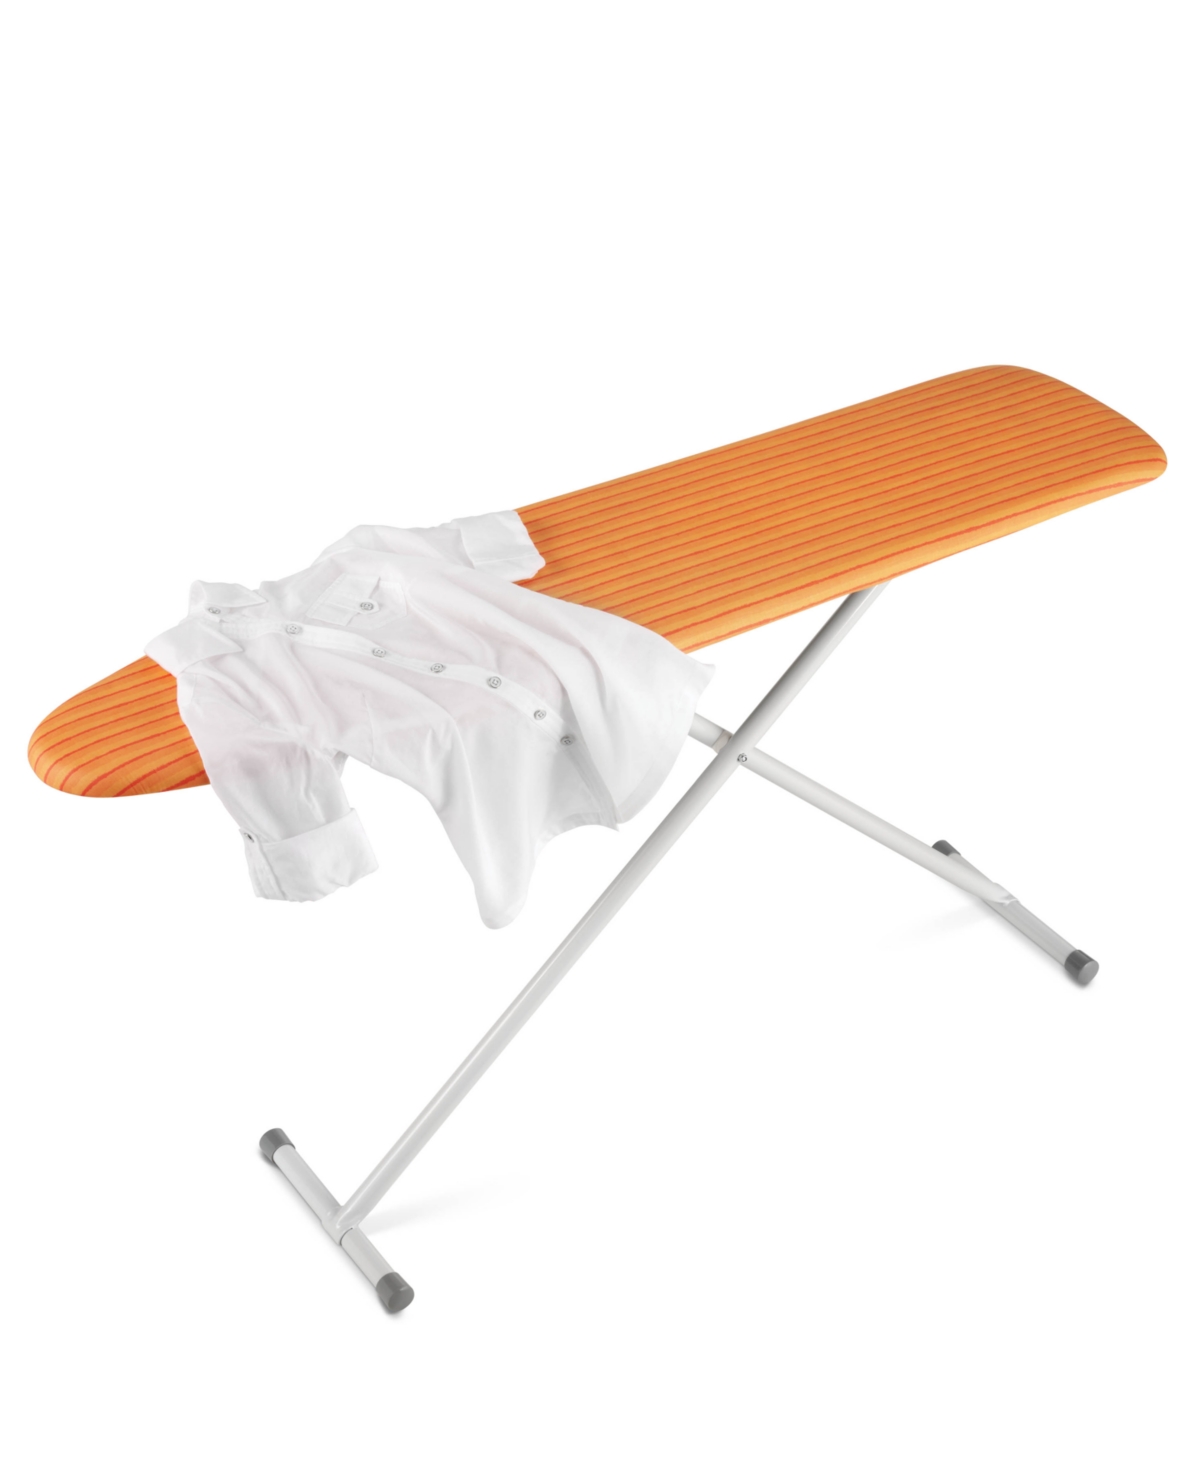 Honey Can Do Collapsible Ironing Board With Sturdy T-legs In Orange